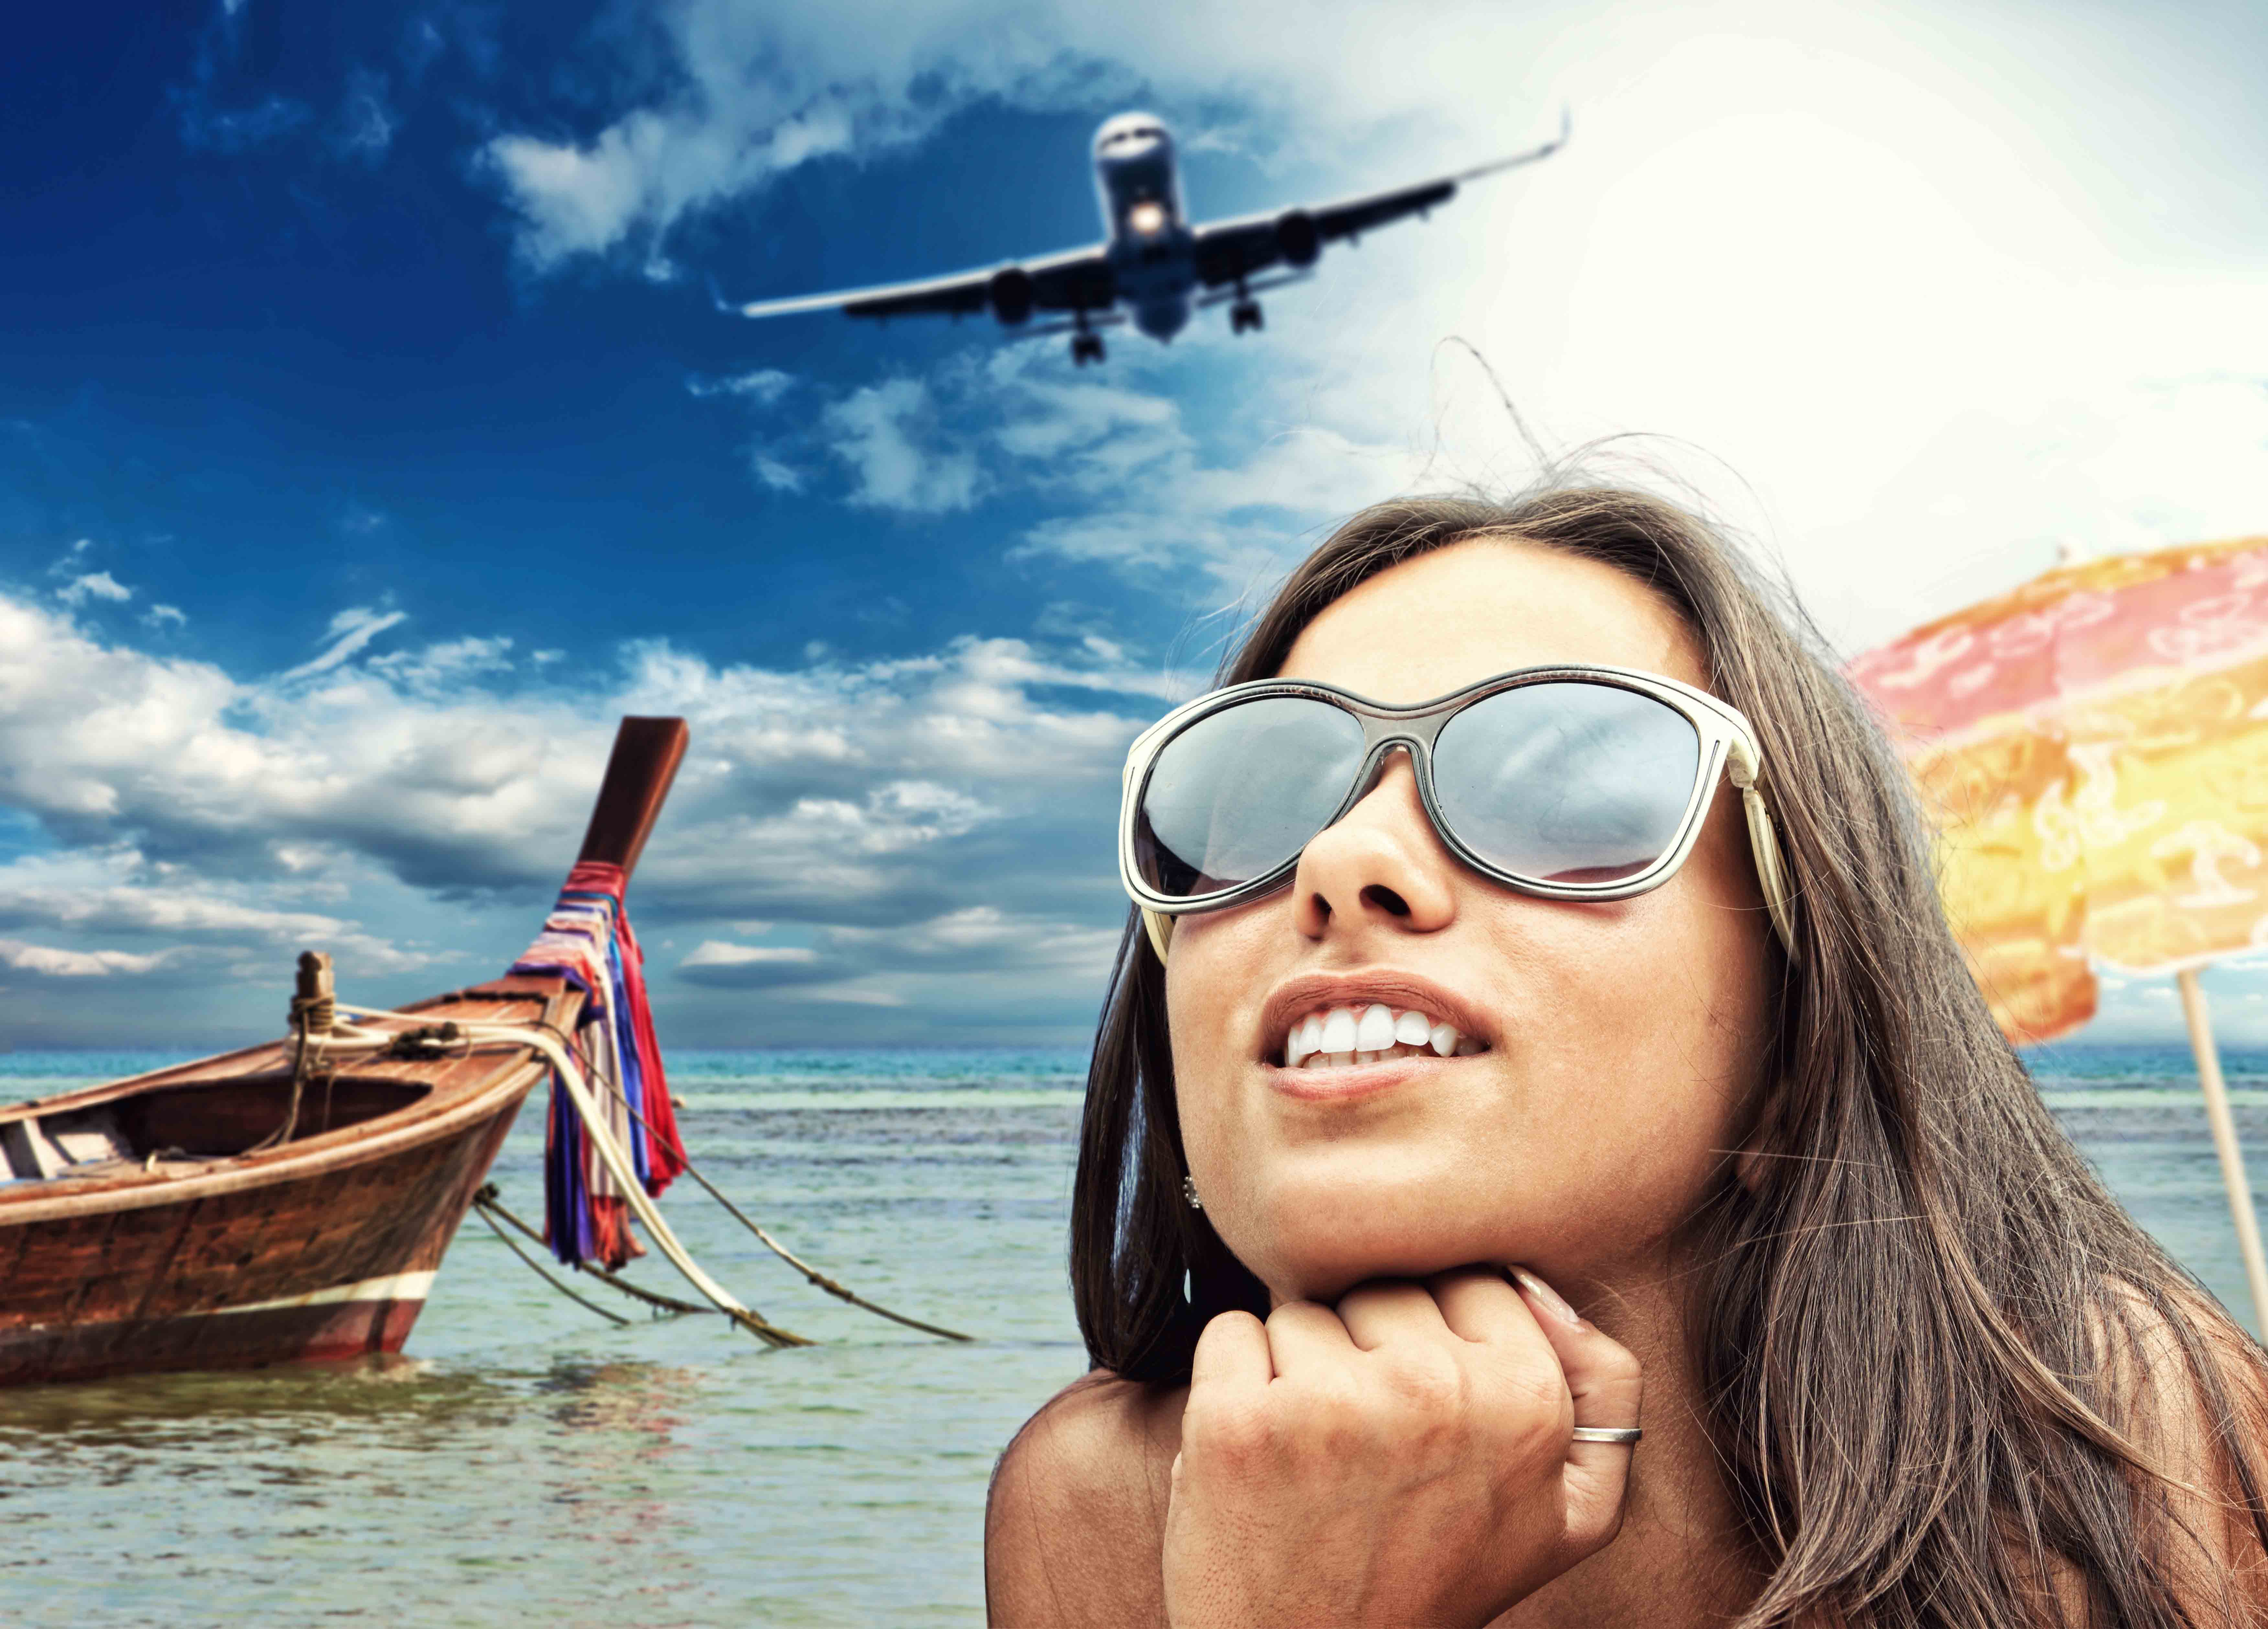 working in travel industry